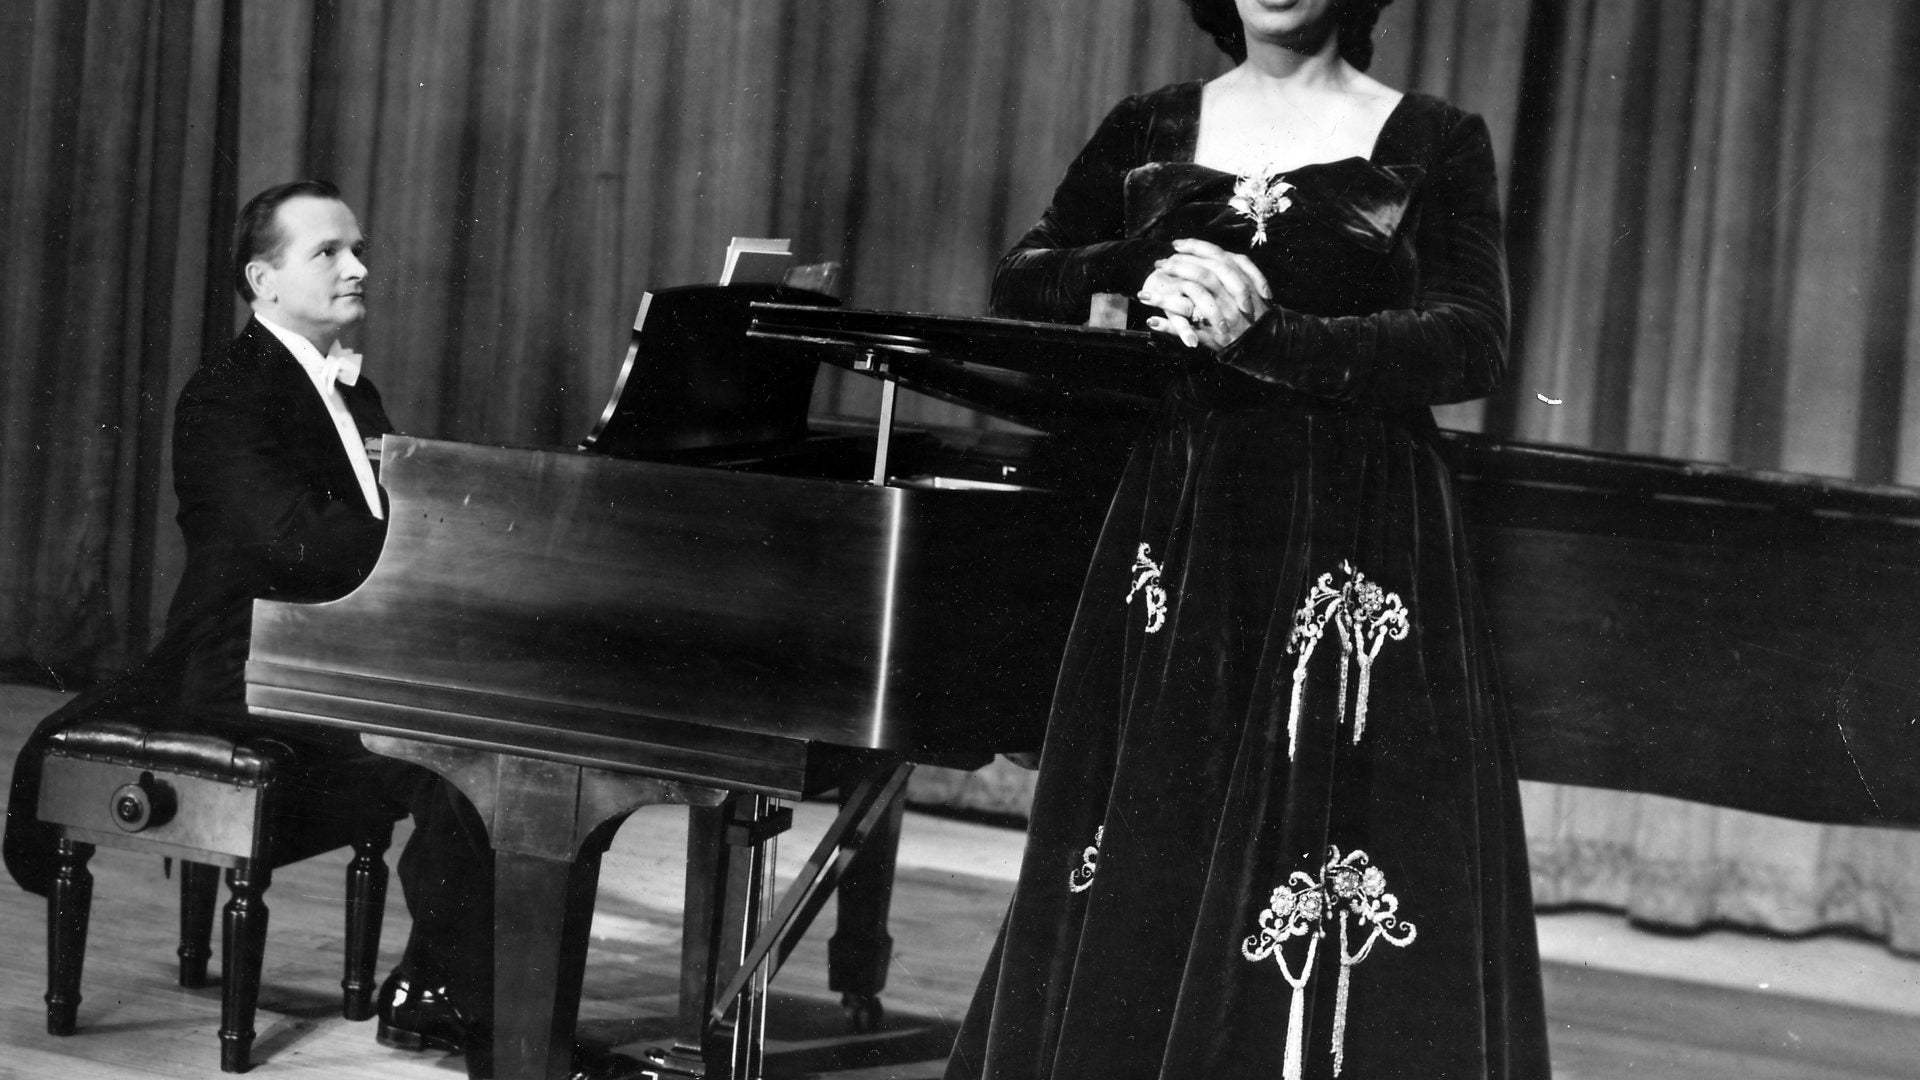 Philadelphia Orchestra To Rename Its Verizon-Branded Concert Hall After Pioneering Singer And Civil Rights Icon Marian Anderson